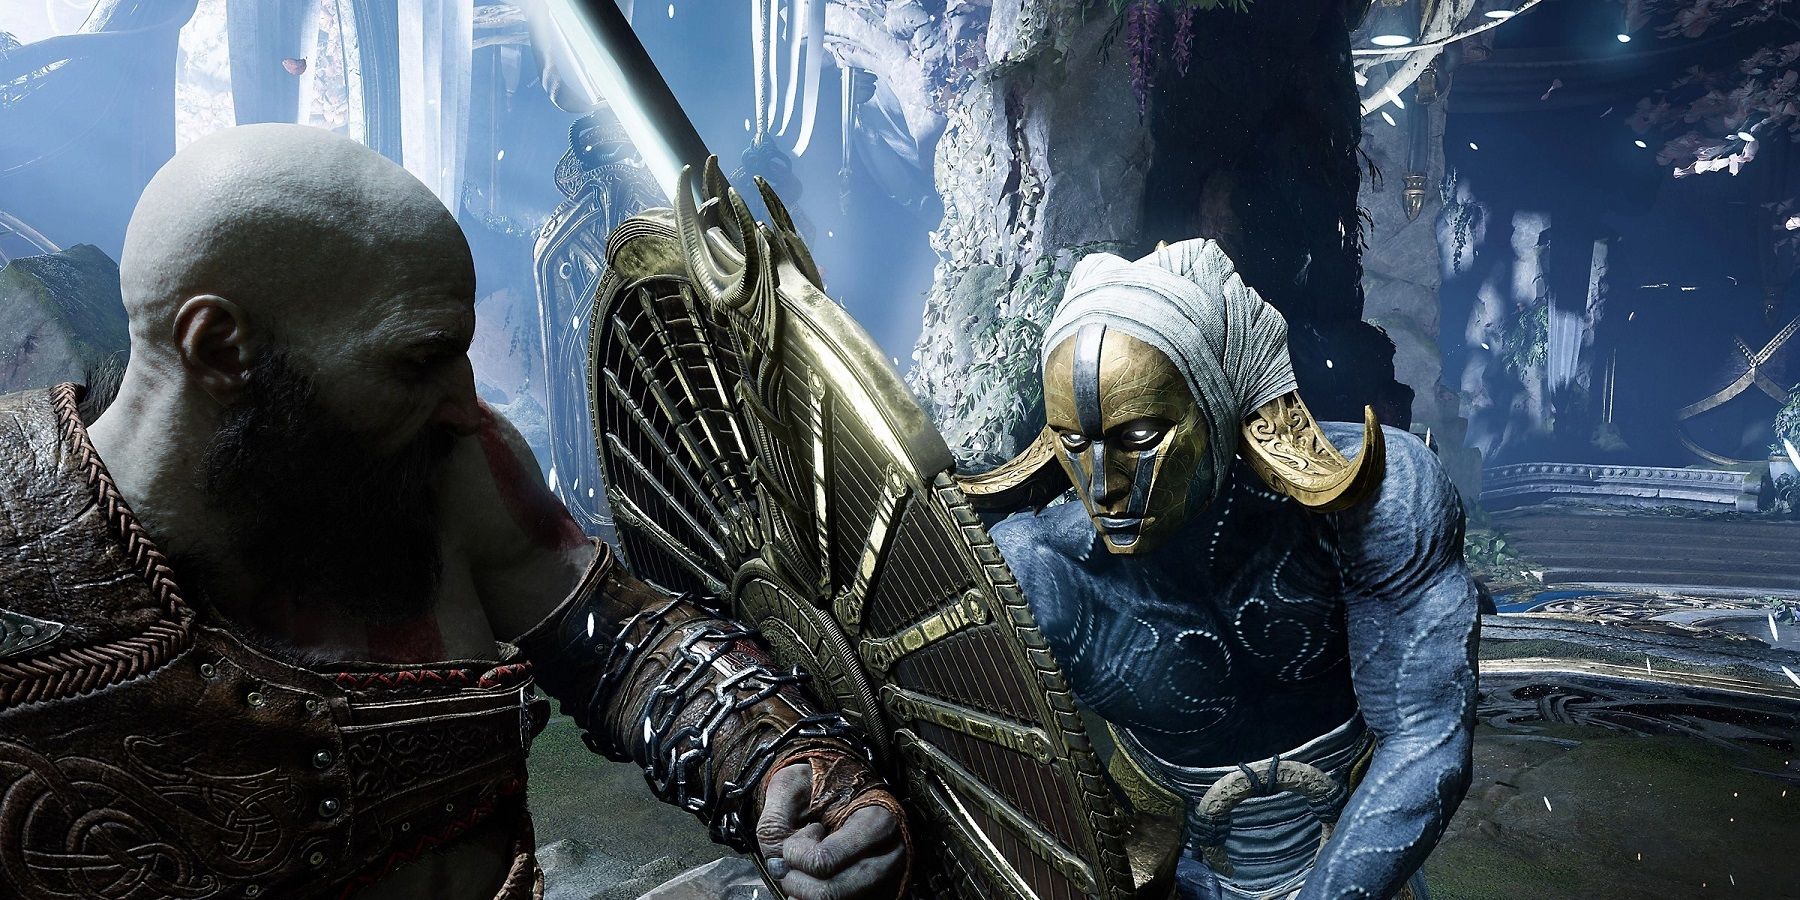 The Best God of War Games, Ranked According to Metacritic